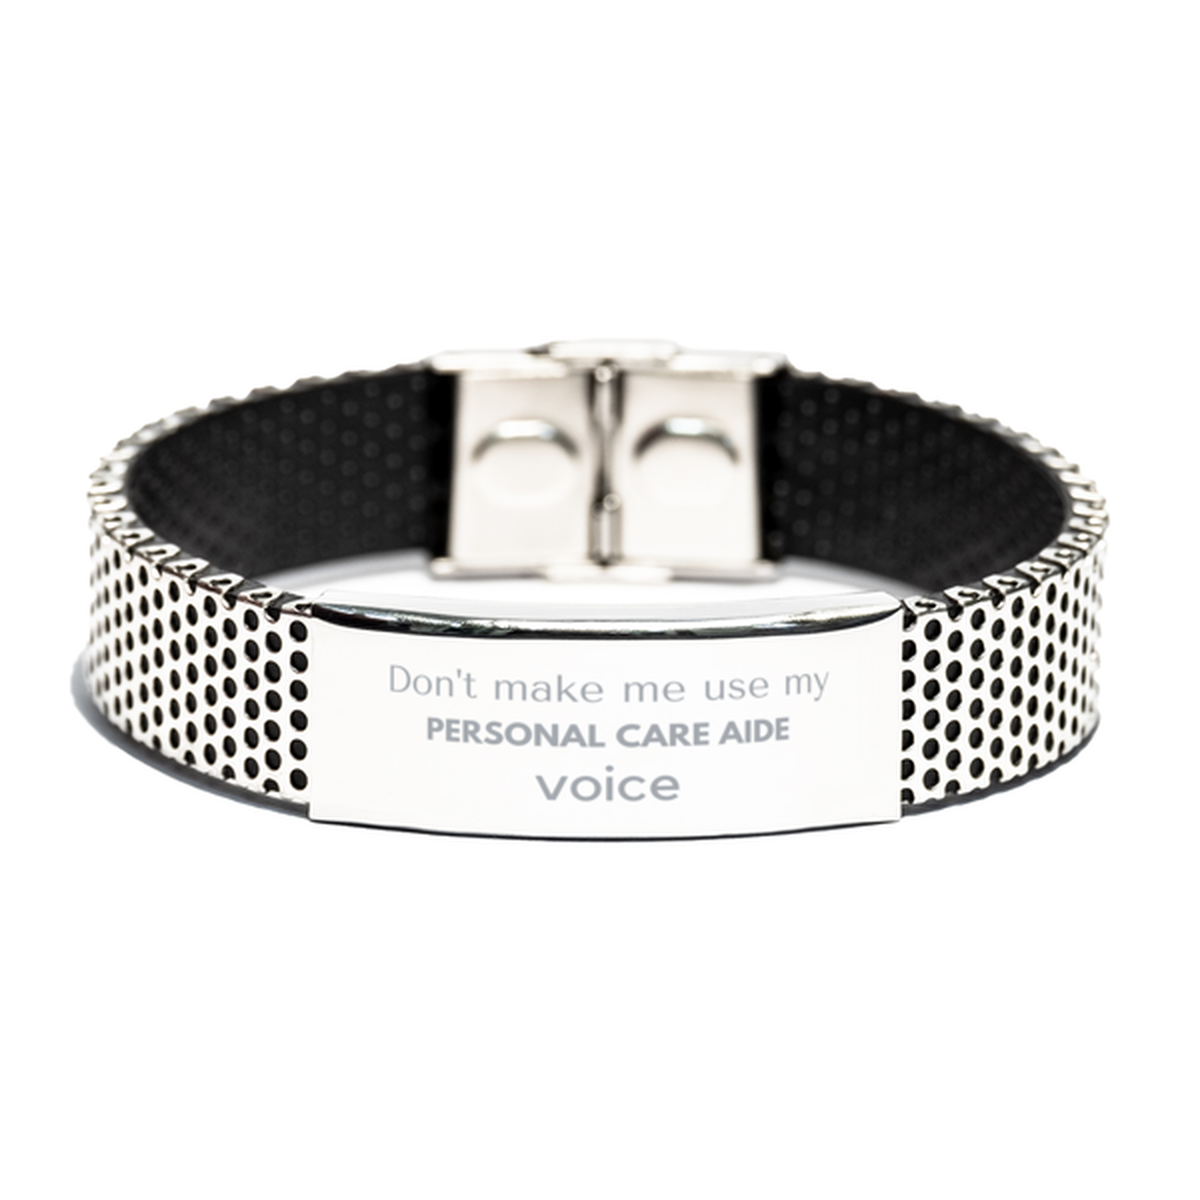 Don't make me use my Personal Care Aide voice, Sarcasm Personal Care Aide Gifts, Christmas Personal Care Aide Stainless Steel Bracelet Birthday Unique Gifts For Personal Care Aide Coworkers, Men, Women, Colleague, Friends